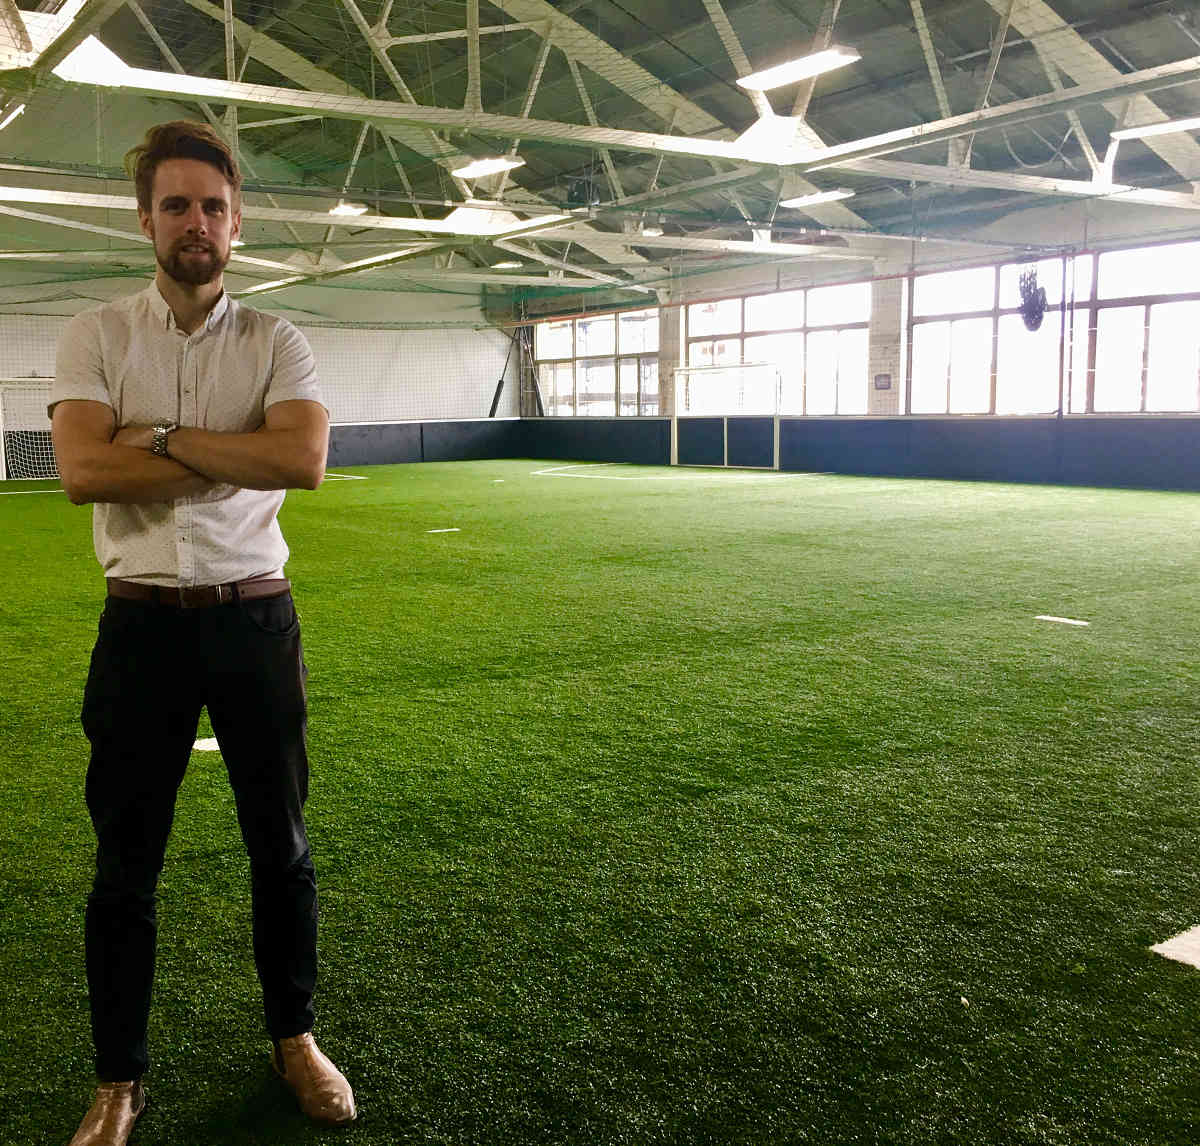 Pitch perfect: S’Park soccer facility boasts fields with skyline views and swanky amenities